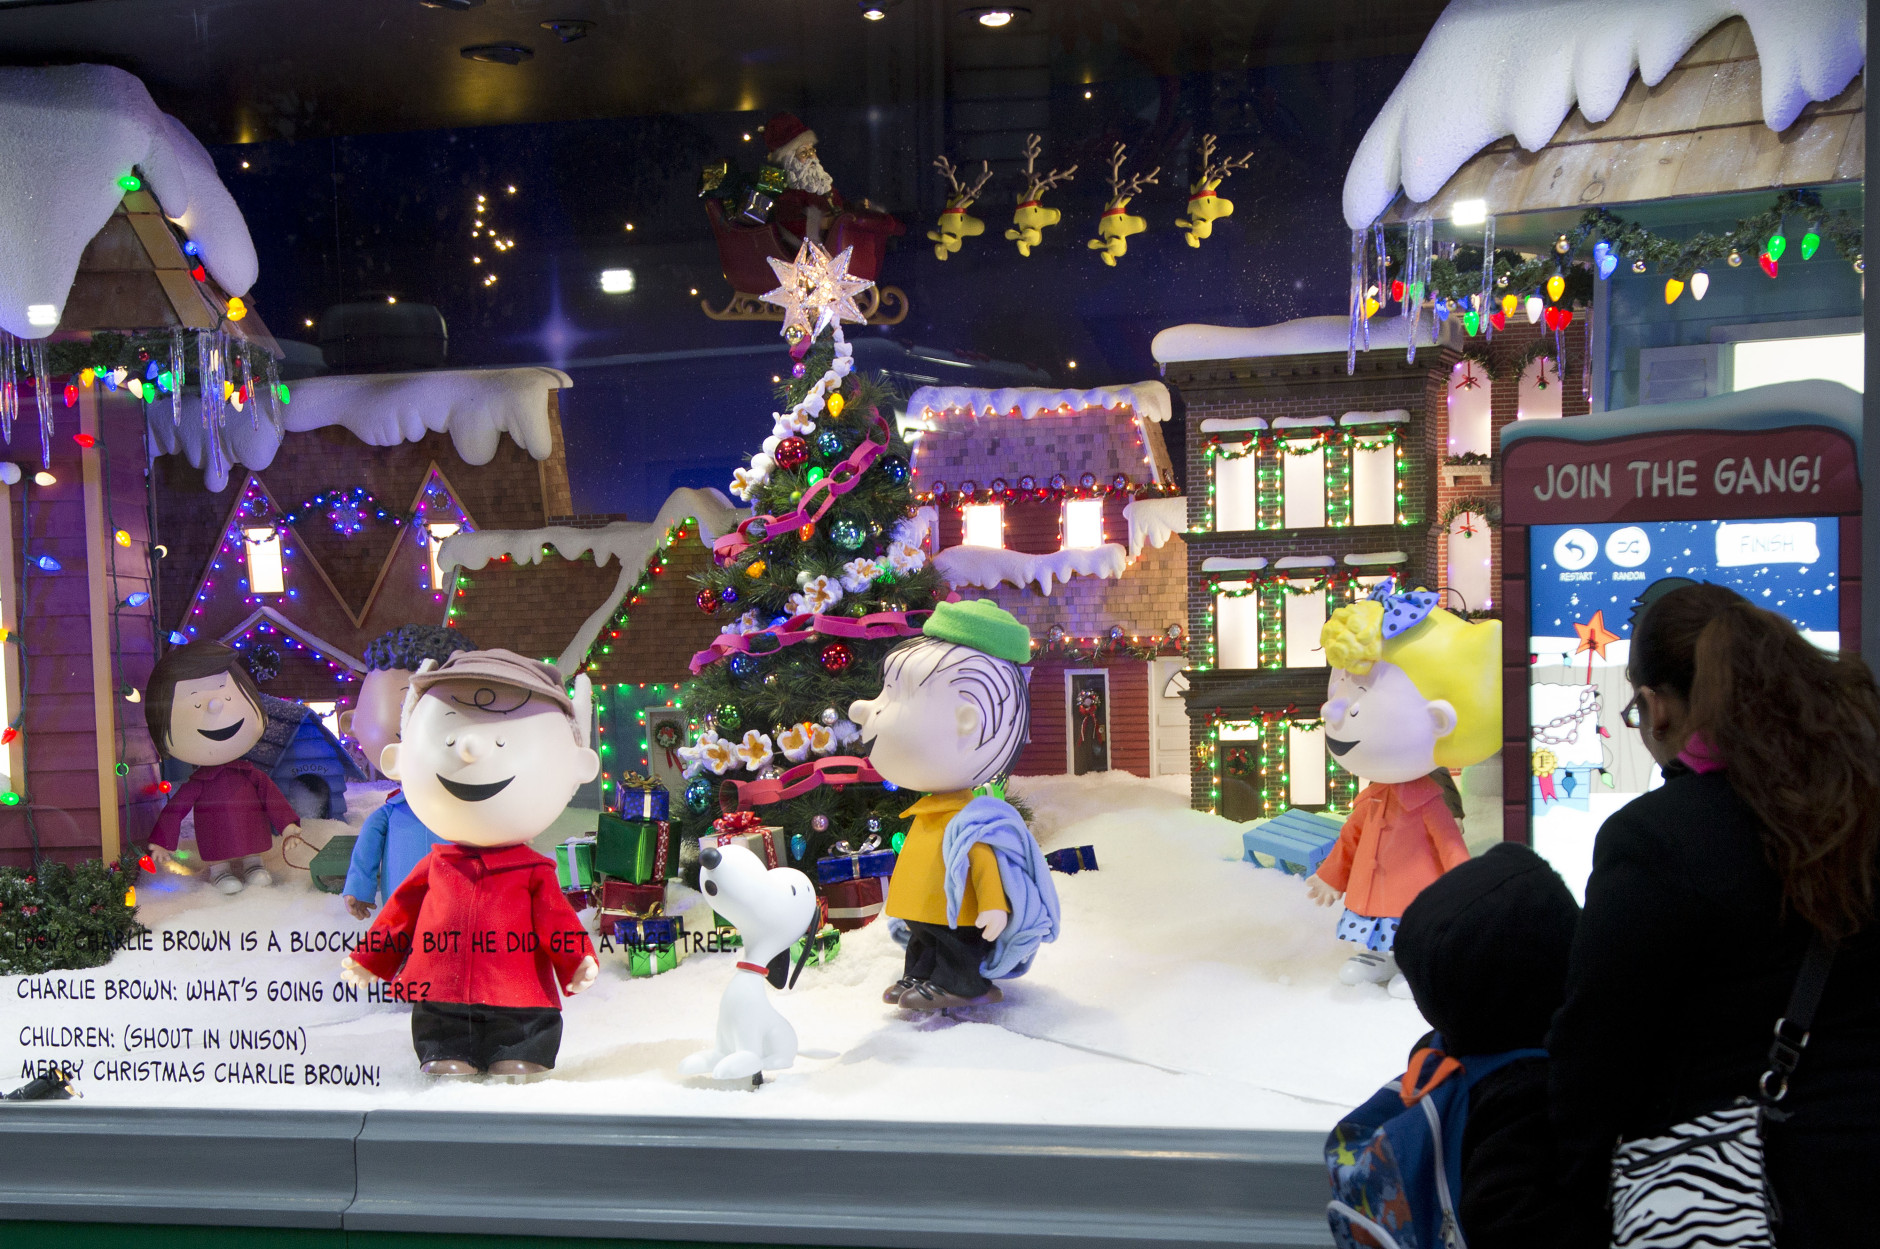 People stop to look at Peanuts characters displayed in a holiday window at Macy's, Tuesday, Nov. 24, 2015 in New York. (AP Photo/Mark Lennihan)